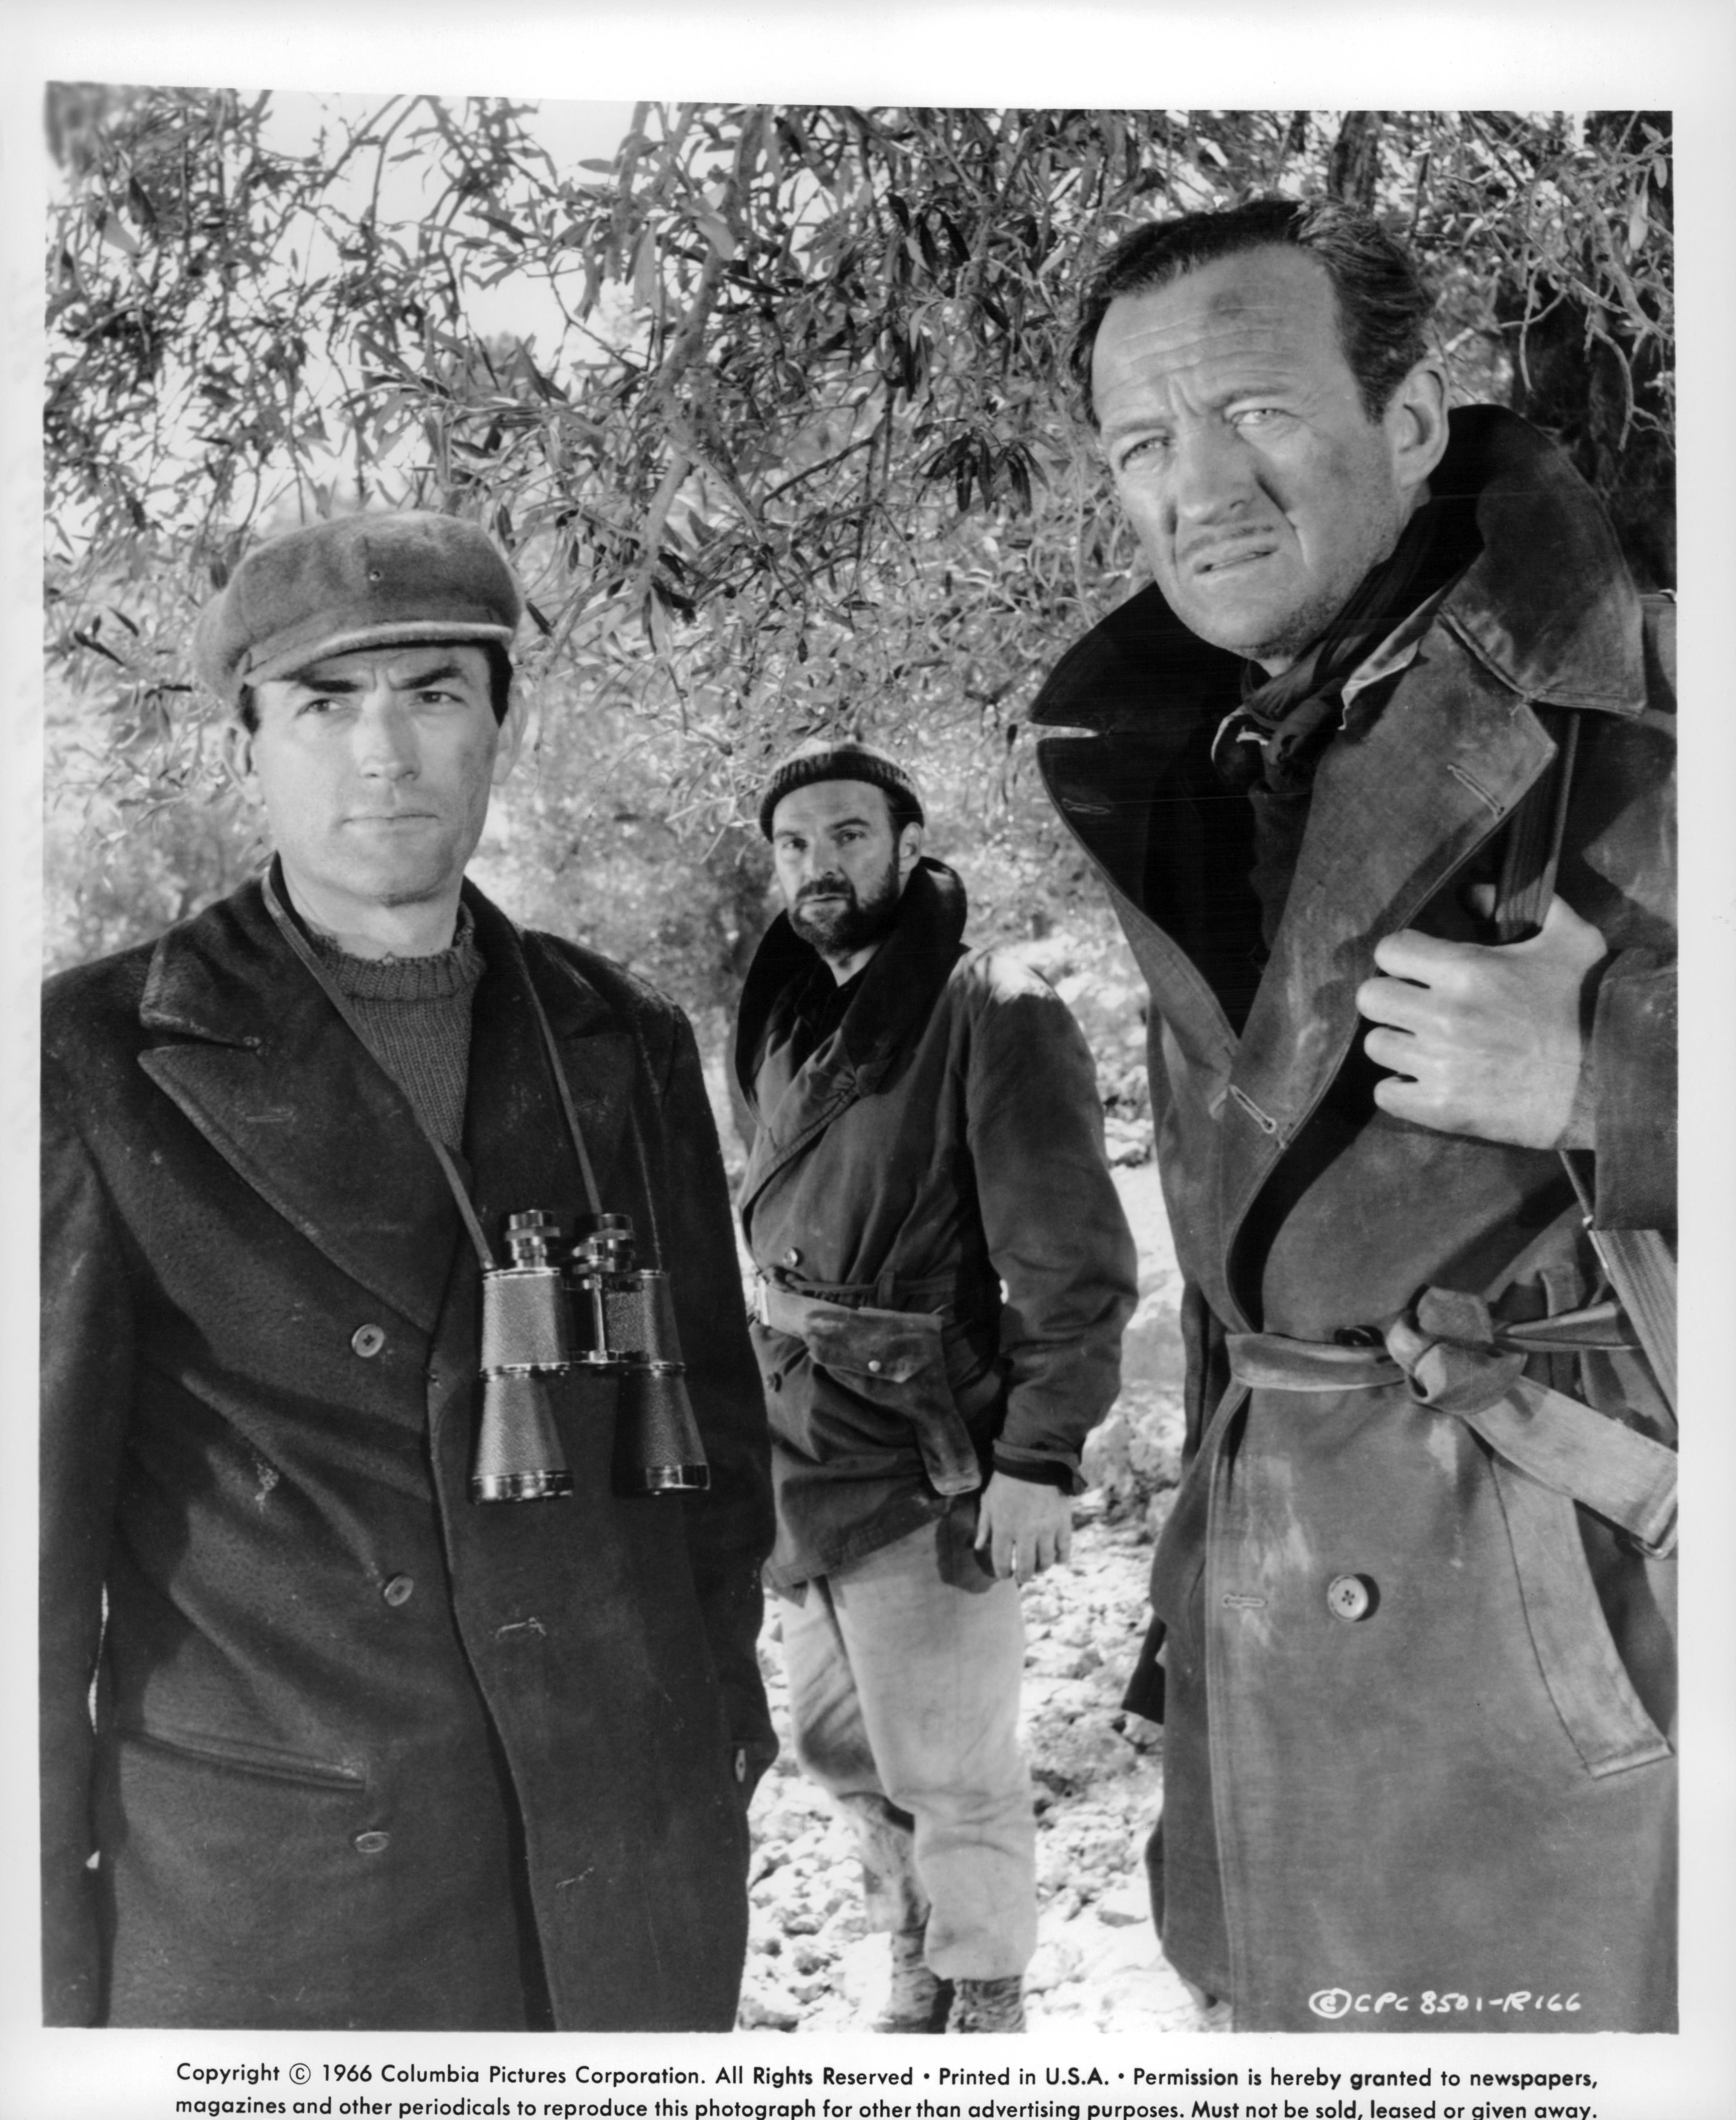 Still of David Niven and Gregory Peck in The Guns of Navarone (1961)